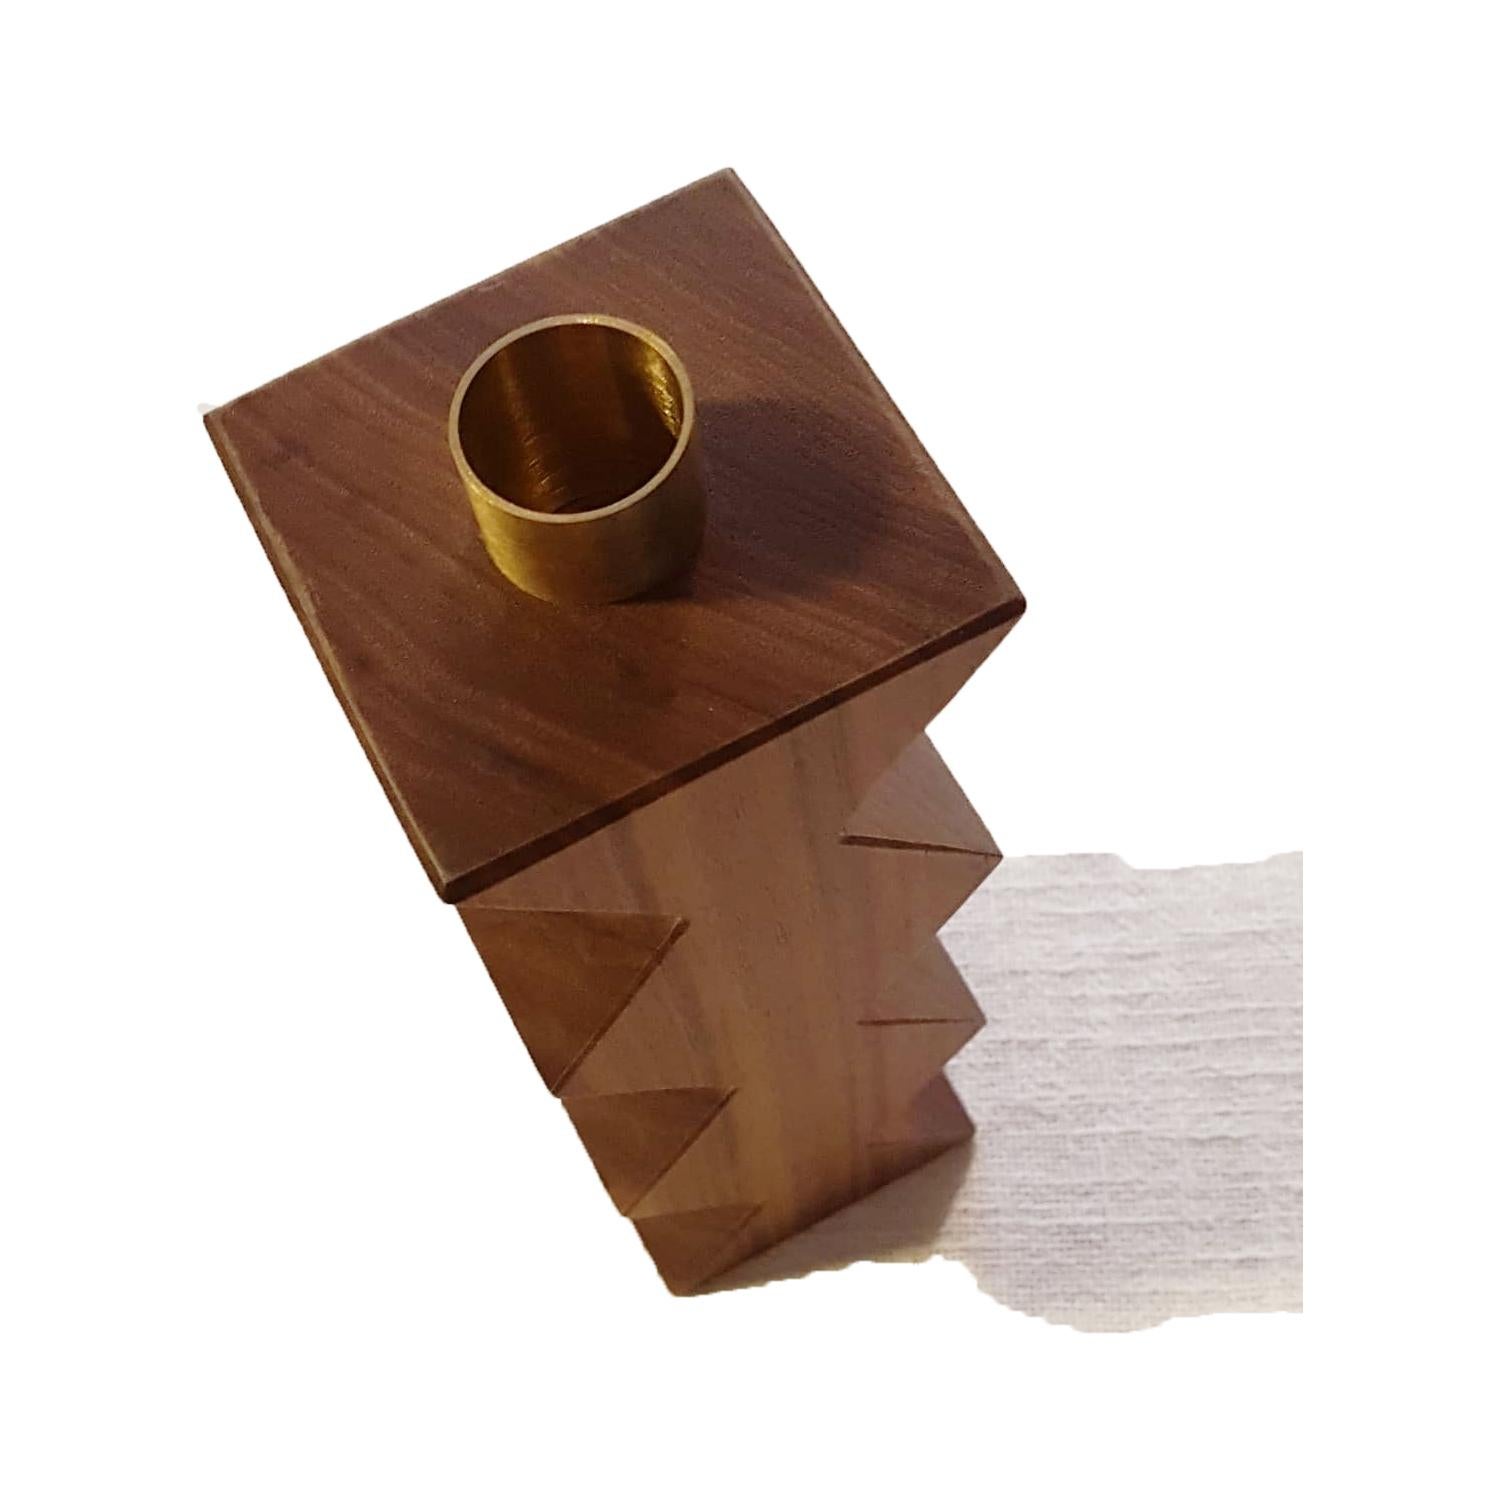 Constantin Set of Candleholders in wood and Brass Minimalist Design 2